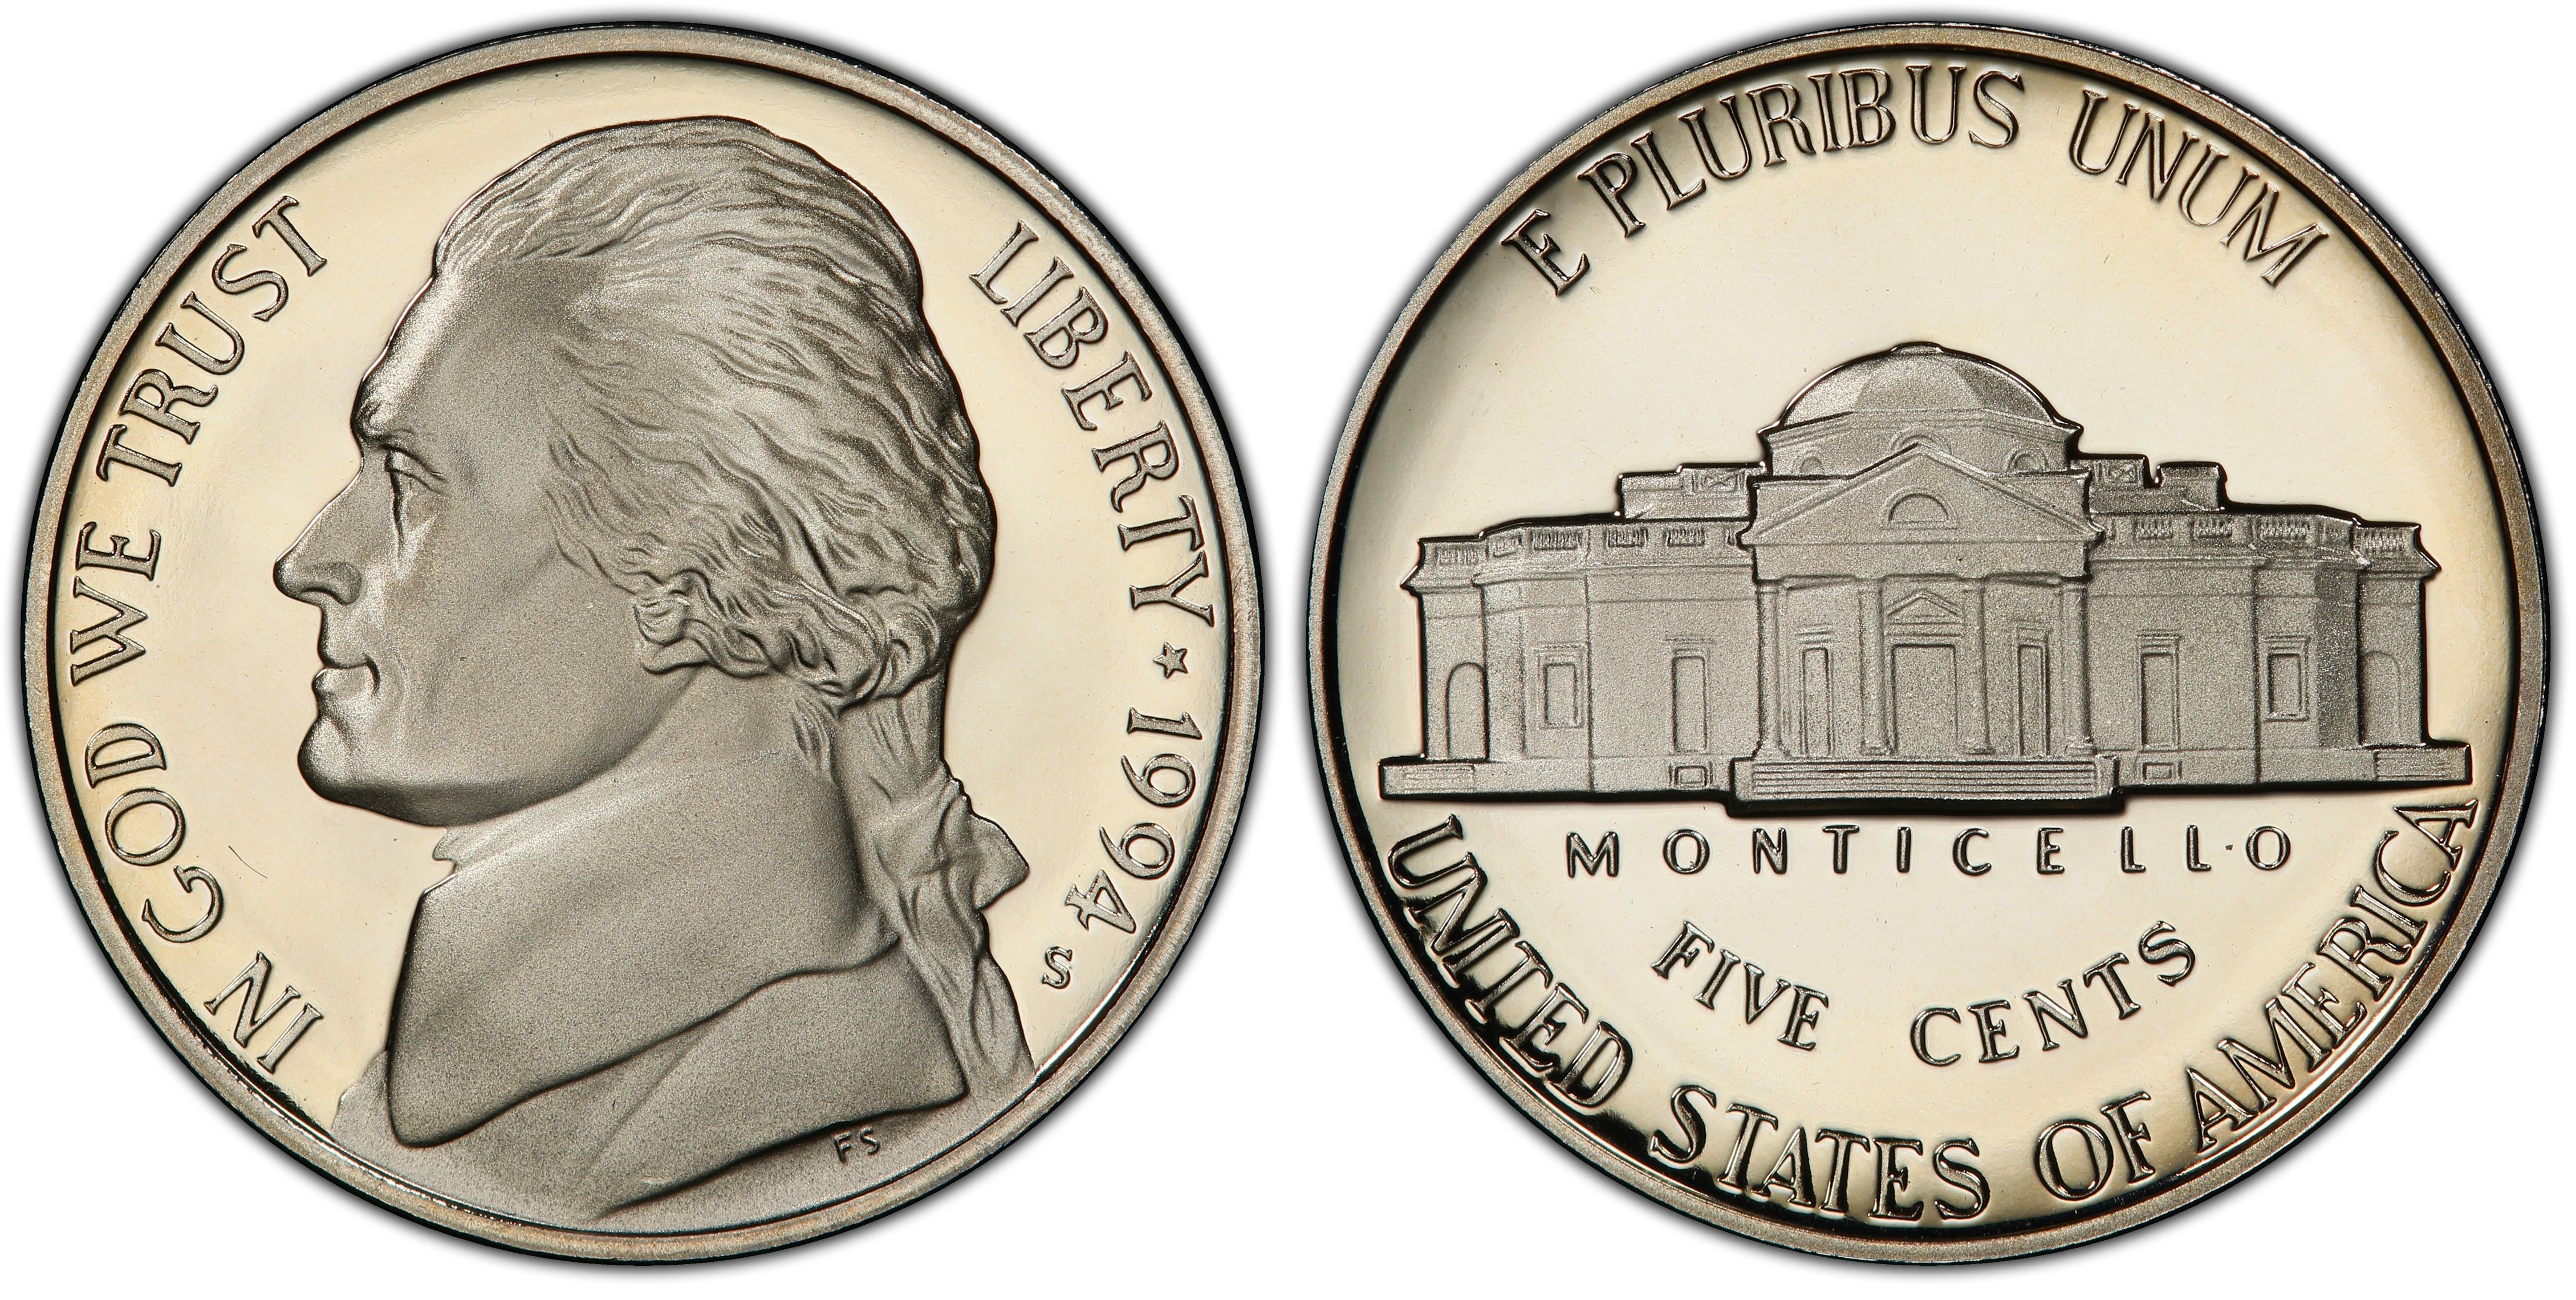 Details about   1994-S Jefferson Nickel Proof 